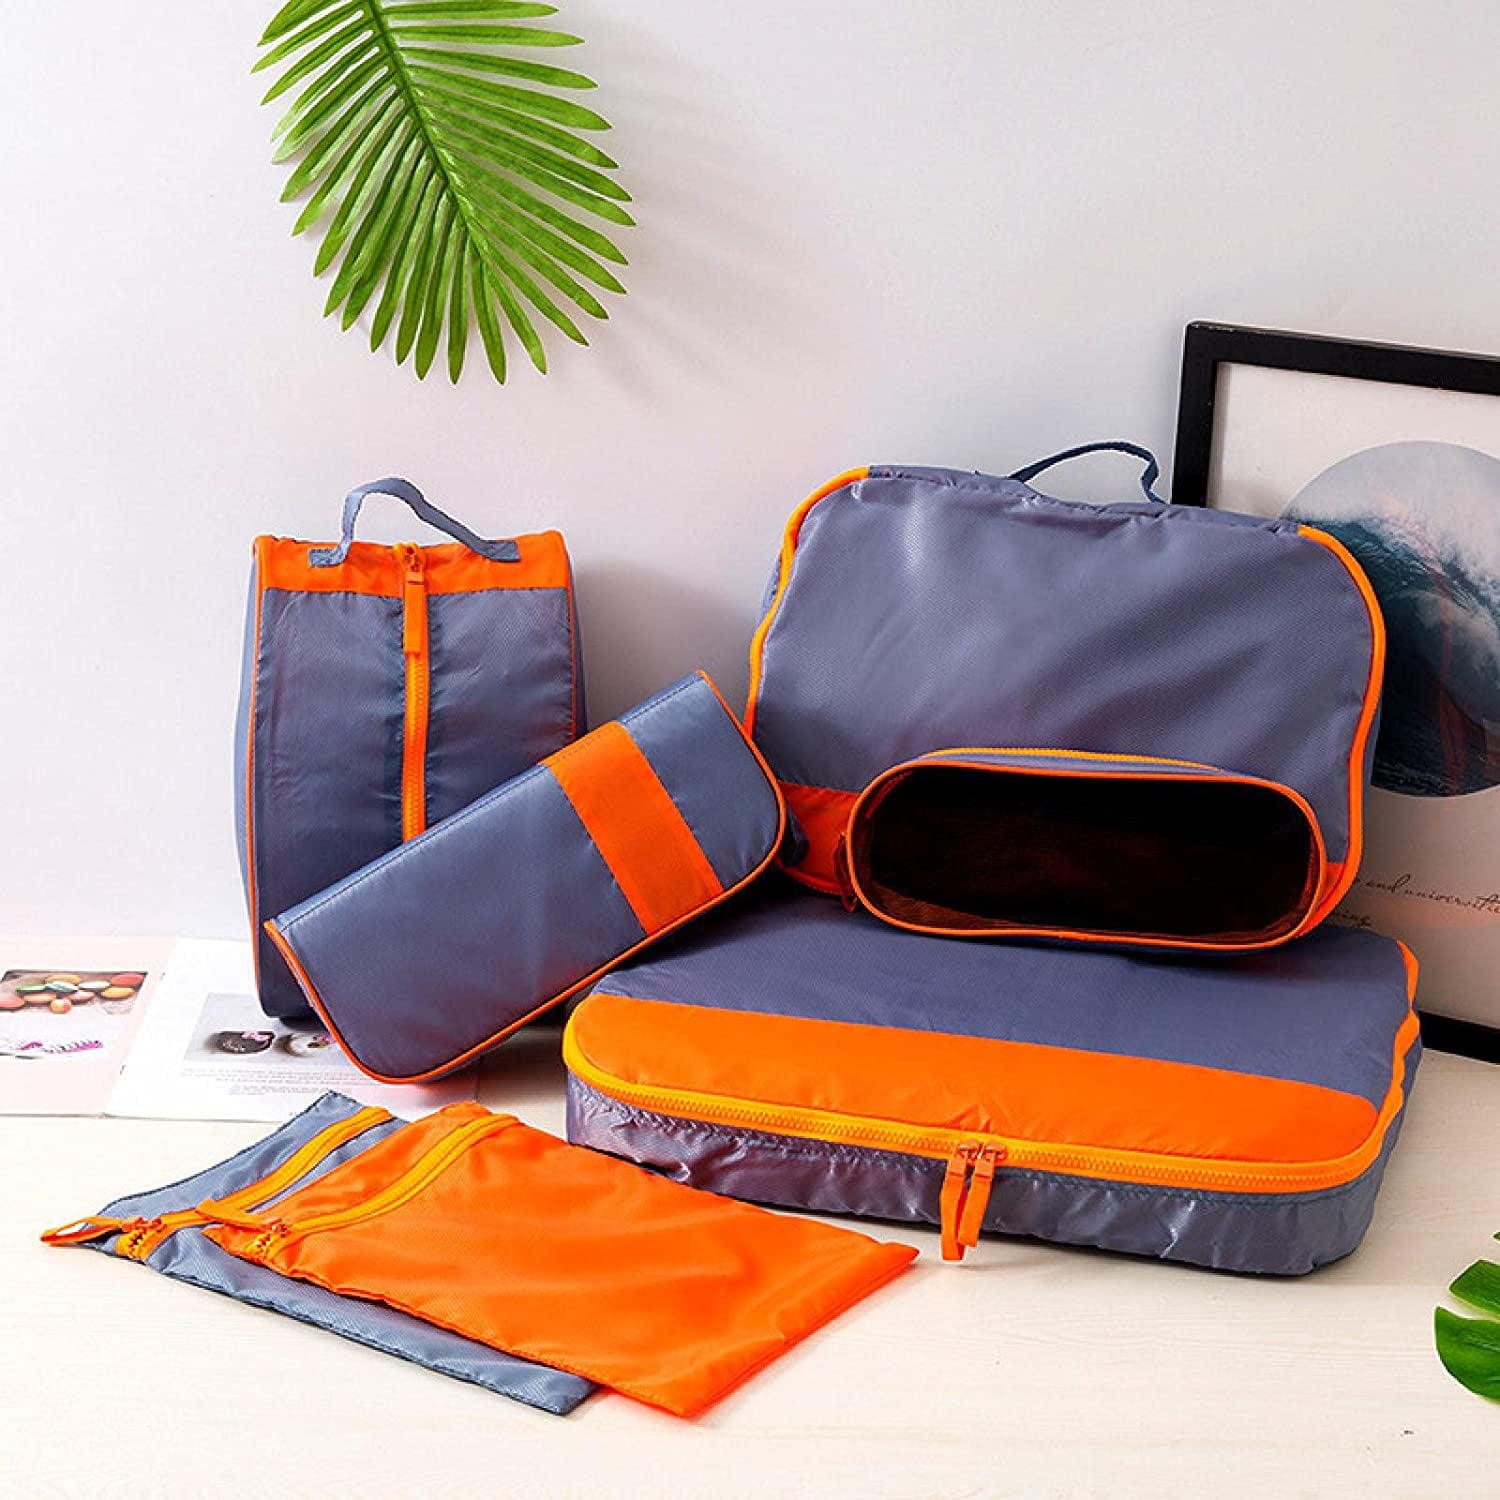 1 Shoe Bag 4 Packing Cubes 1 Compress Pouches Palm Star 7 Set Travel Organiser Luggage Storage Bags 1 Bunch Pocket 